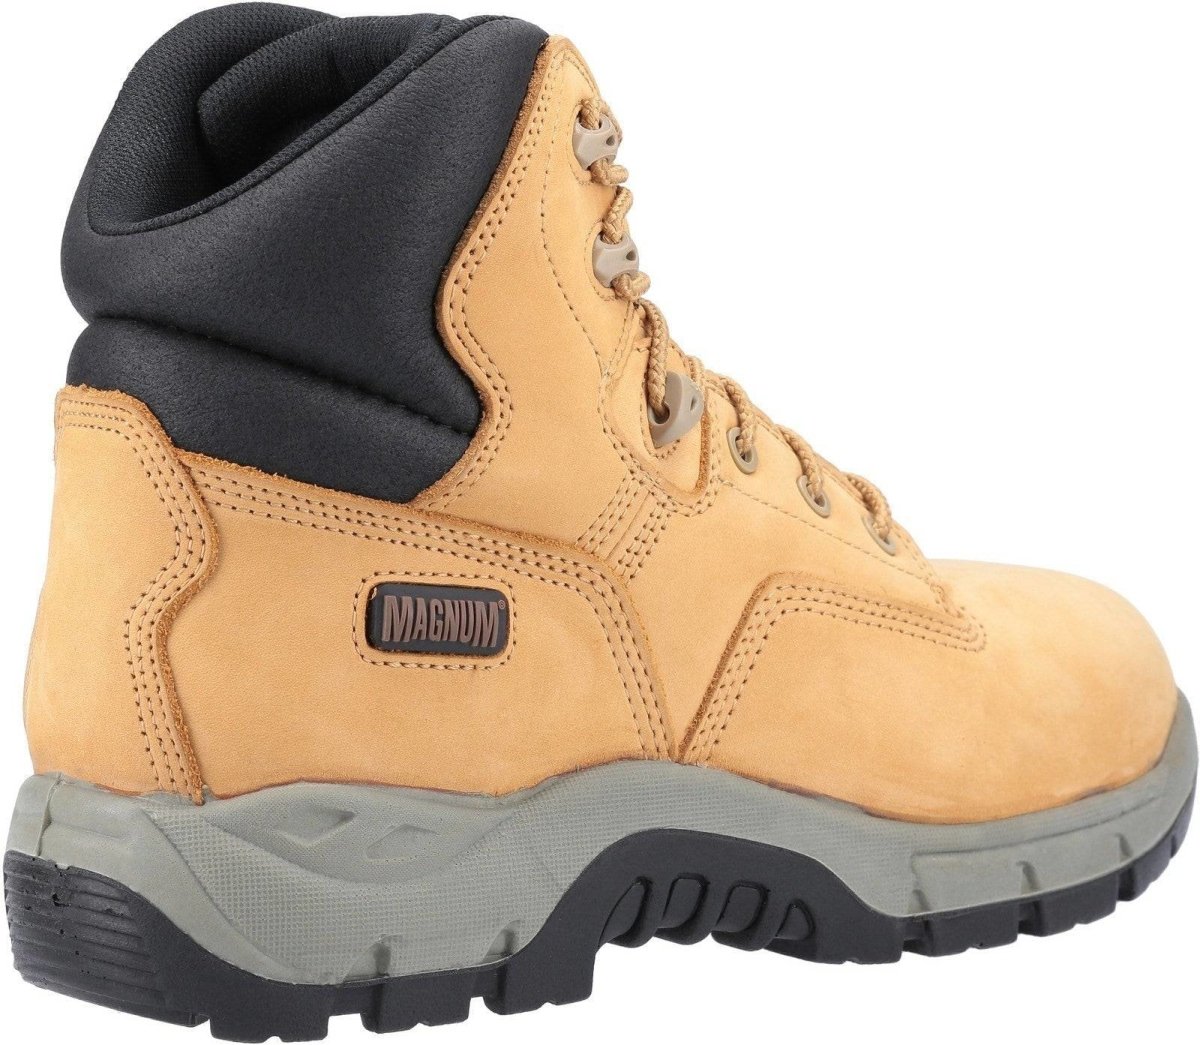 Magnum Precision Sitemaster Composite Toe Safety Boots - Shoe Store Direct